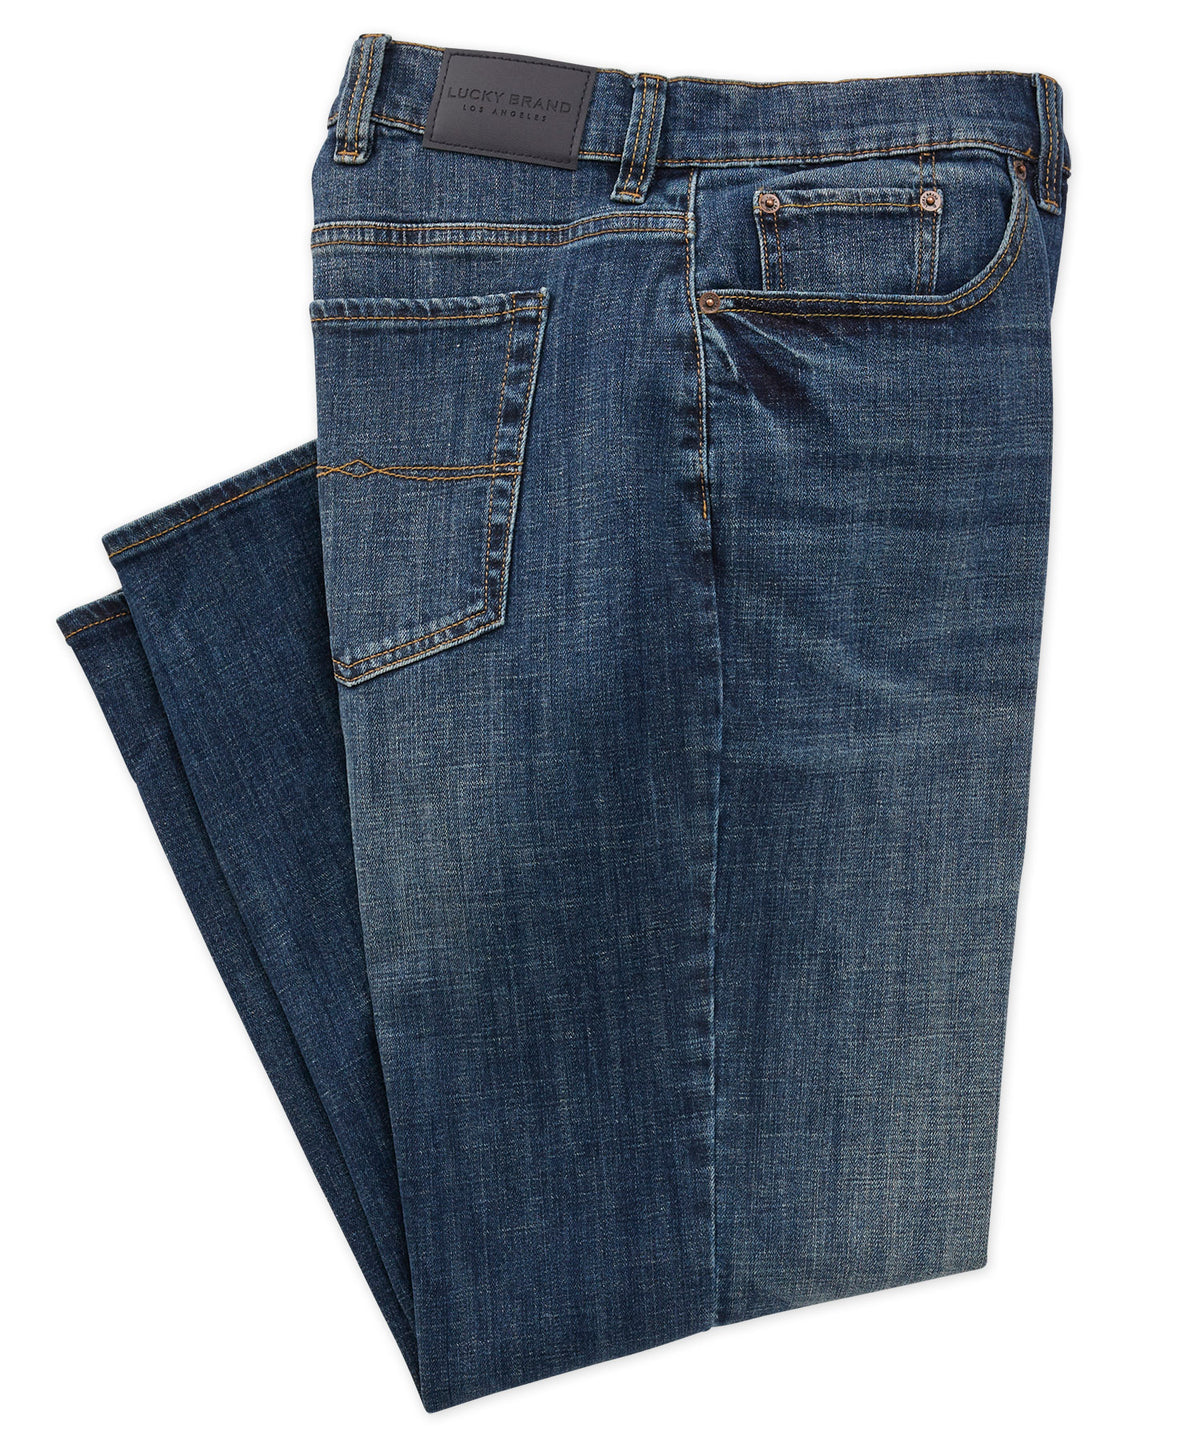 Lucky Brand Lakewood Stretch Jeans - Westport Big & Tall